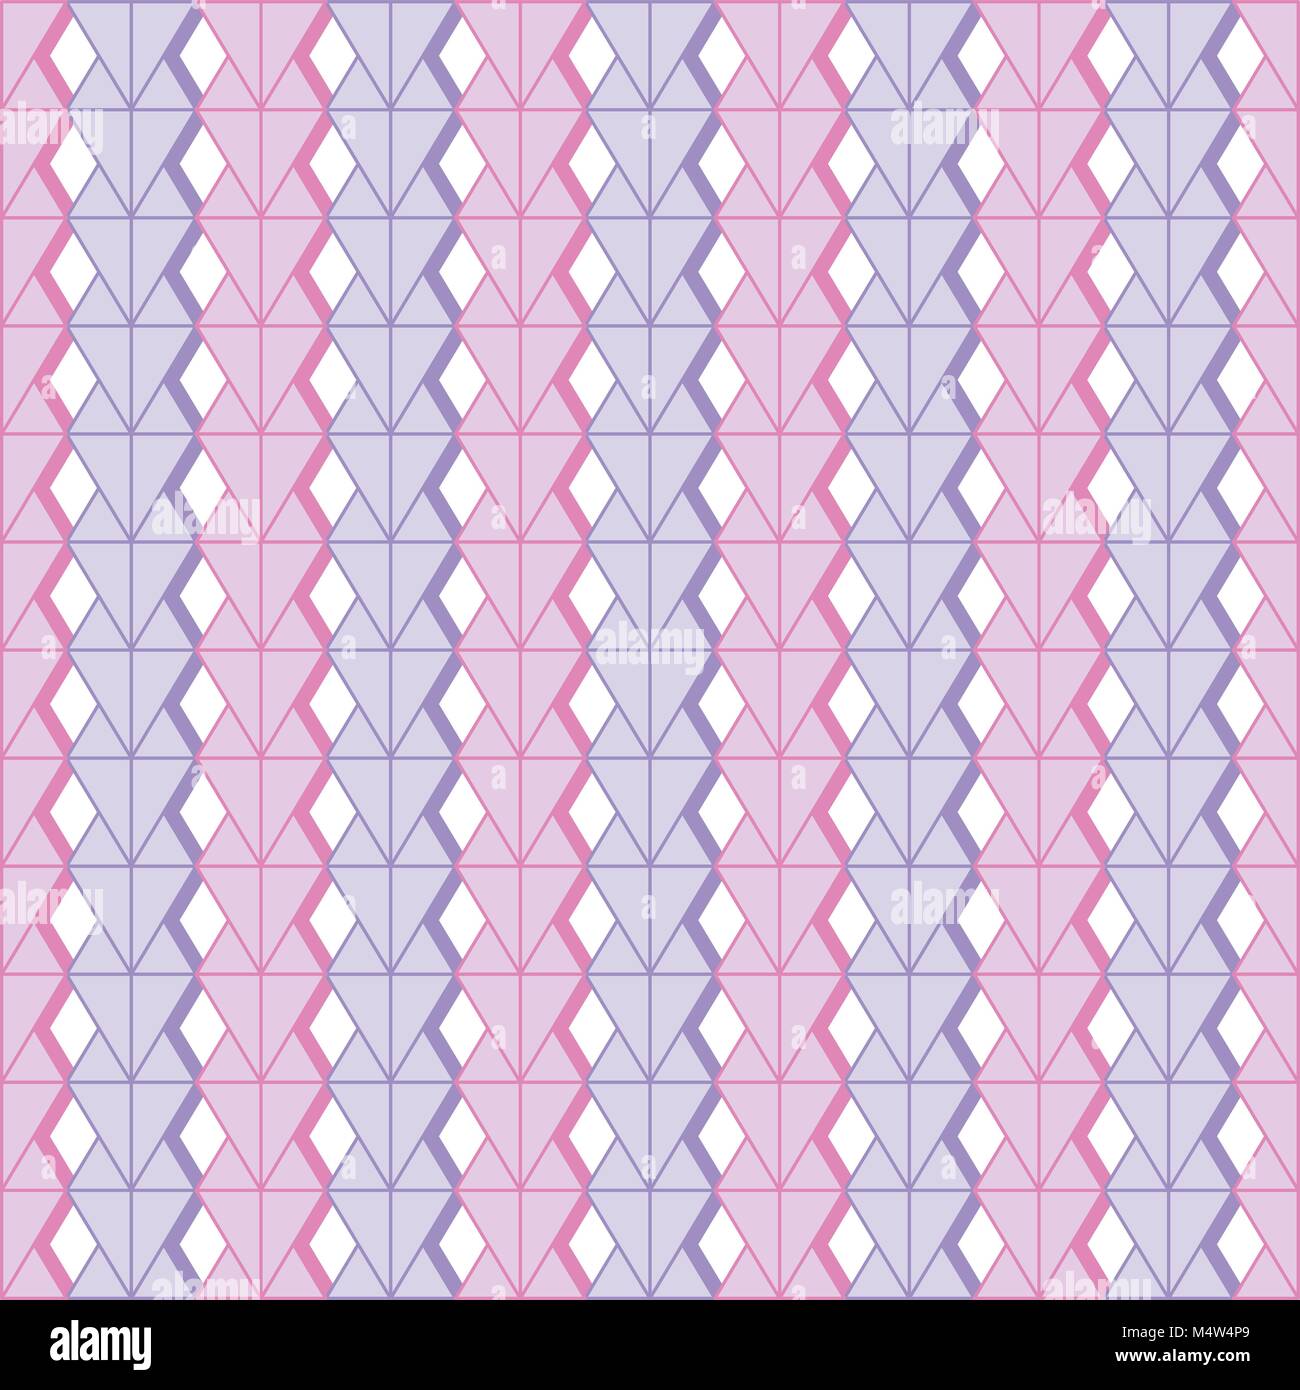 Geometric pattern of ultra violet and pink stripes. Vector illustration, EPS 10. Stock Vector